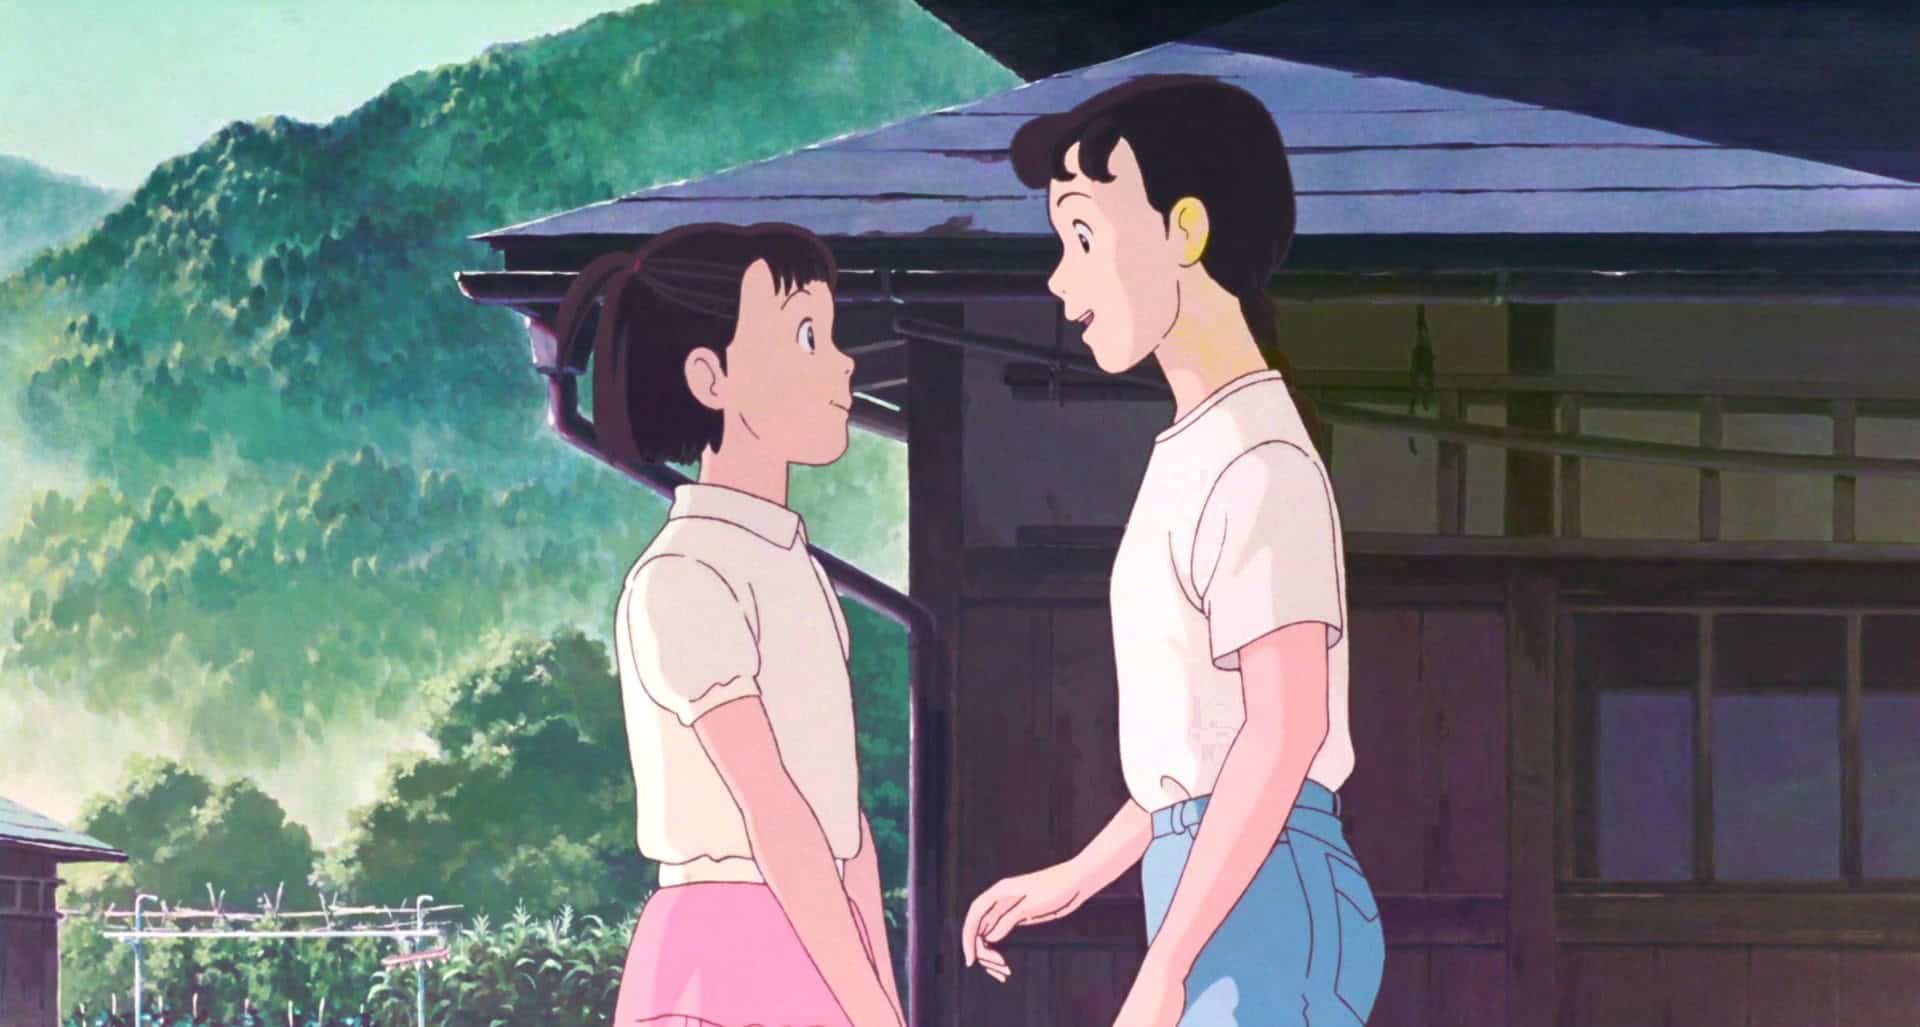 An animated girl and boy stand in front of a mountain home in this image from Studio Ghibli.